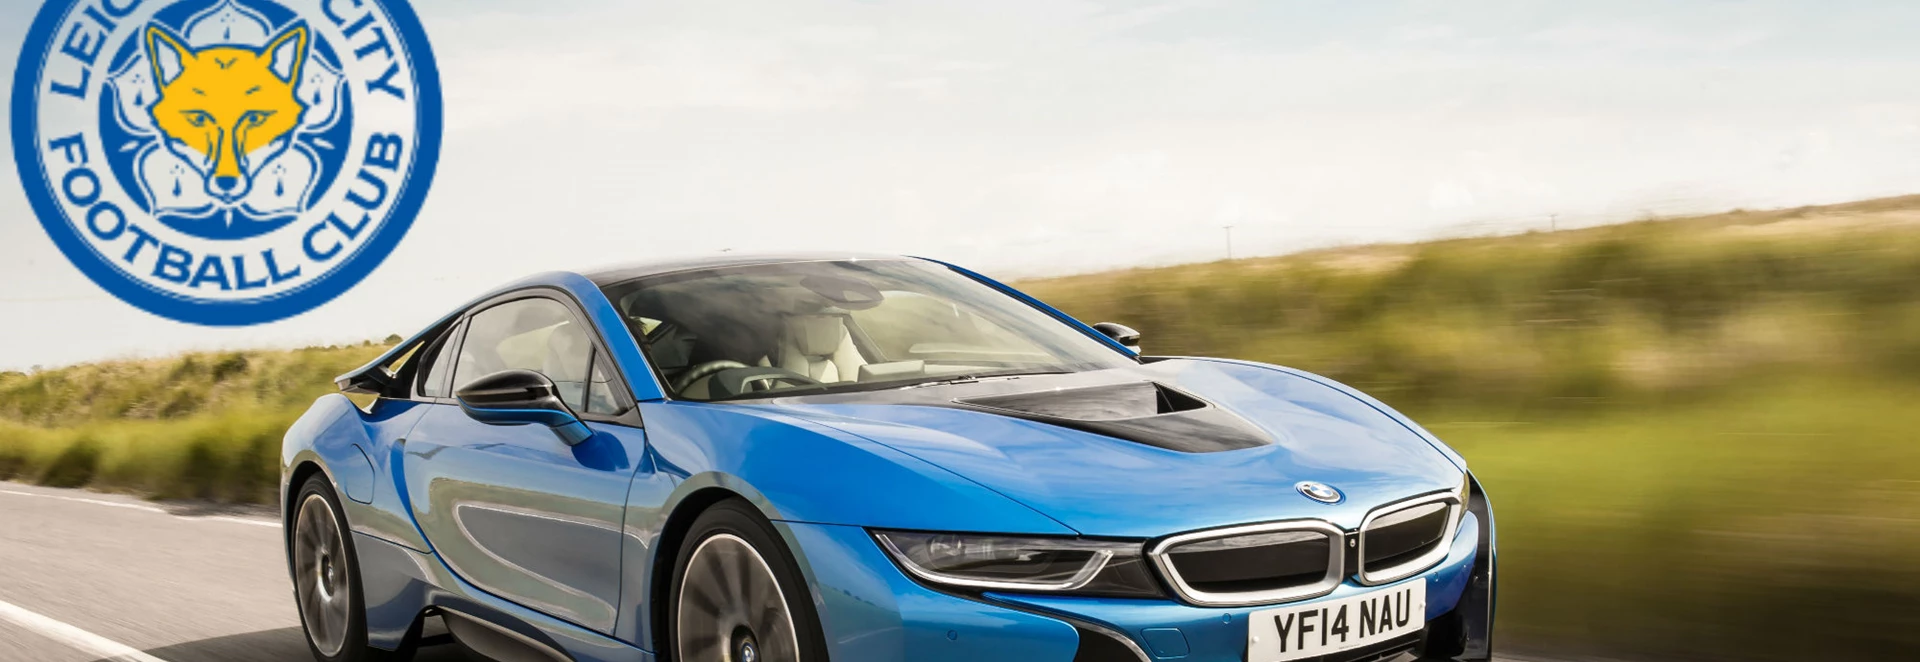 Leicester City footballers get a free BMW i8 from club owners 